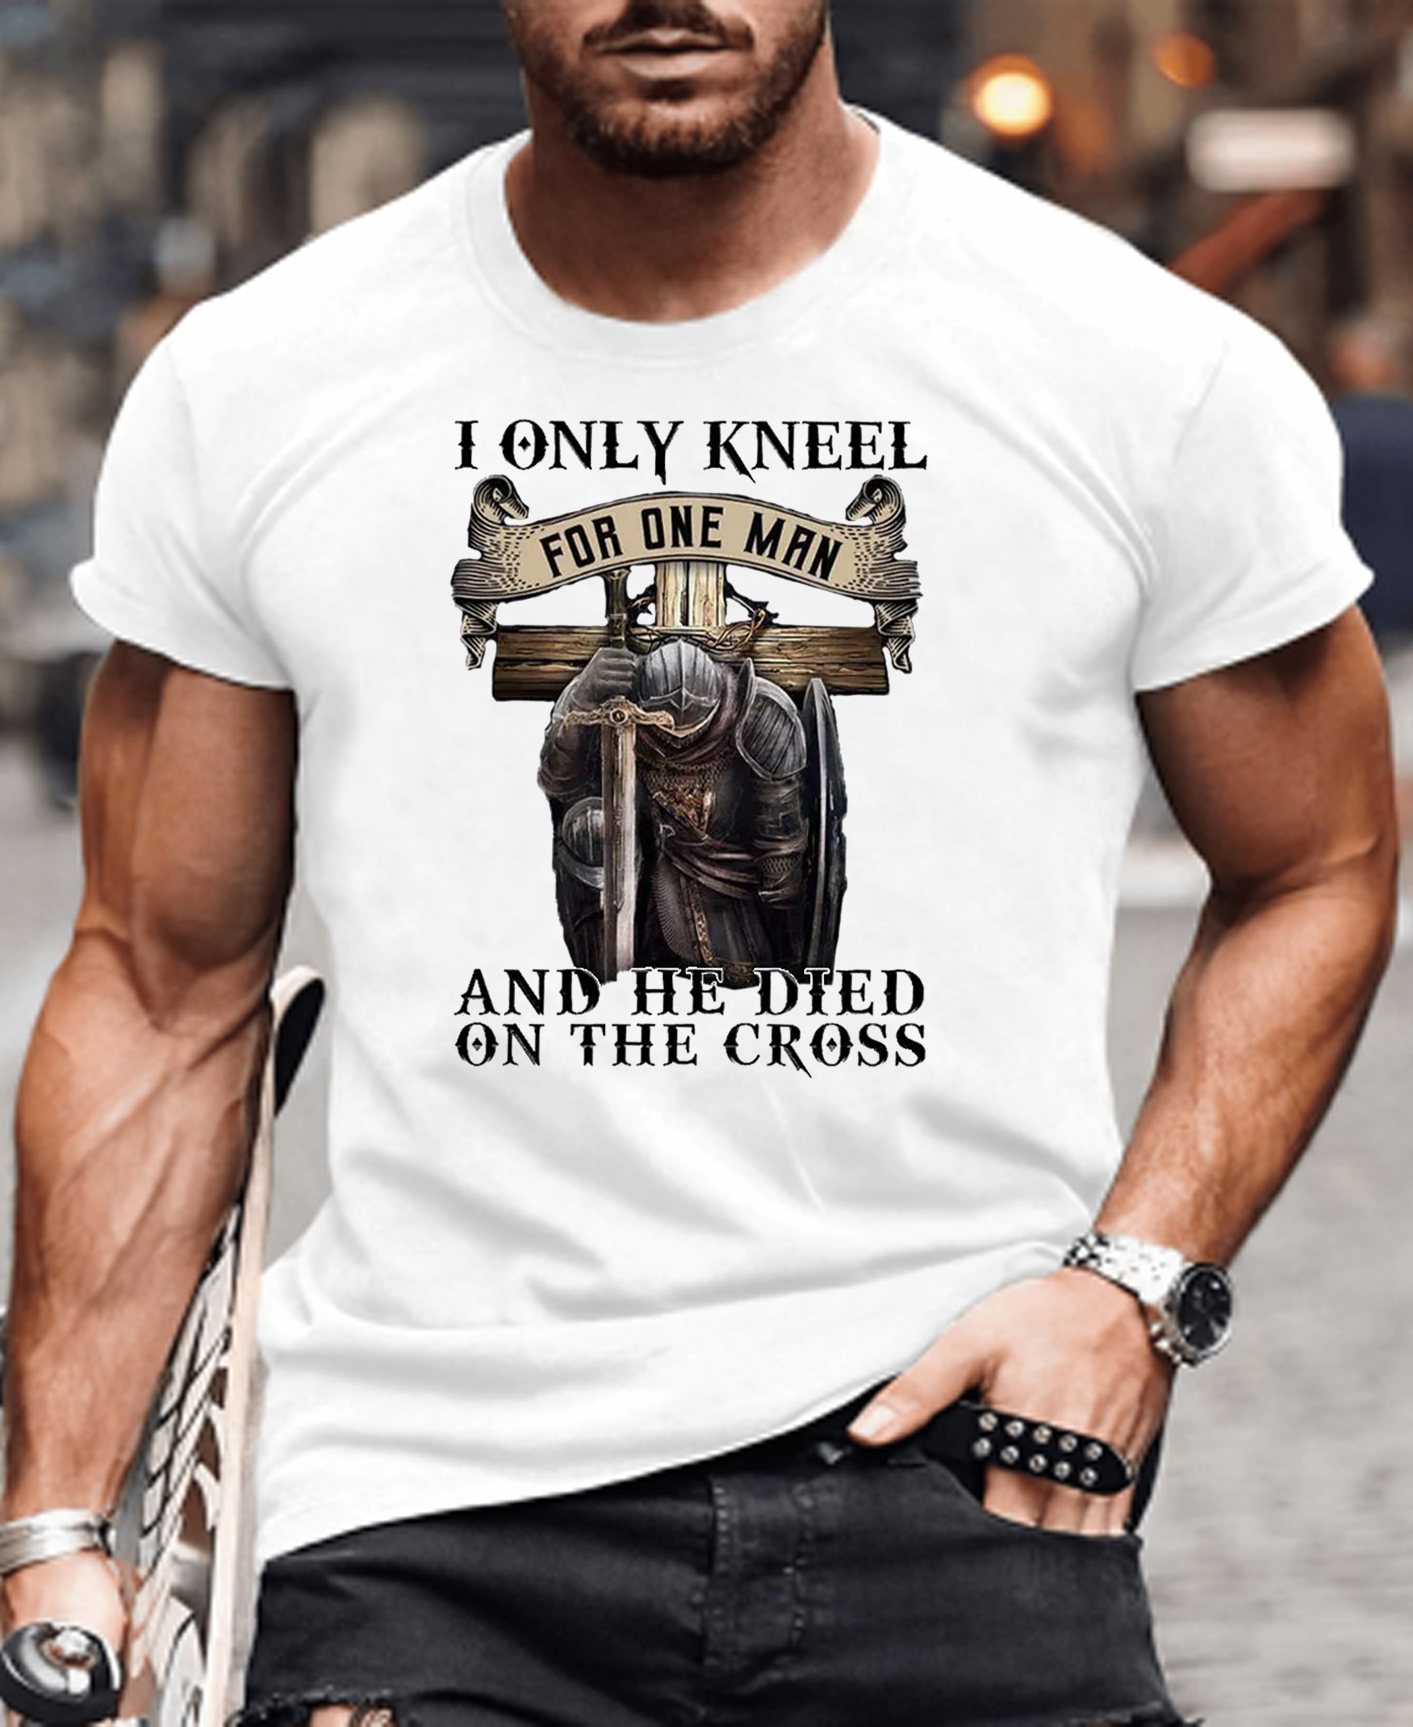 I Only Kneel for One Man And He Died On The Cross Tee